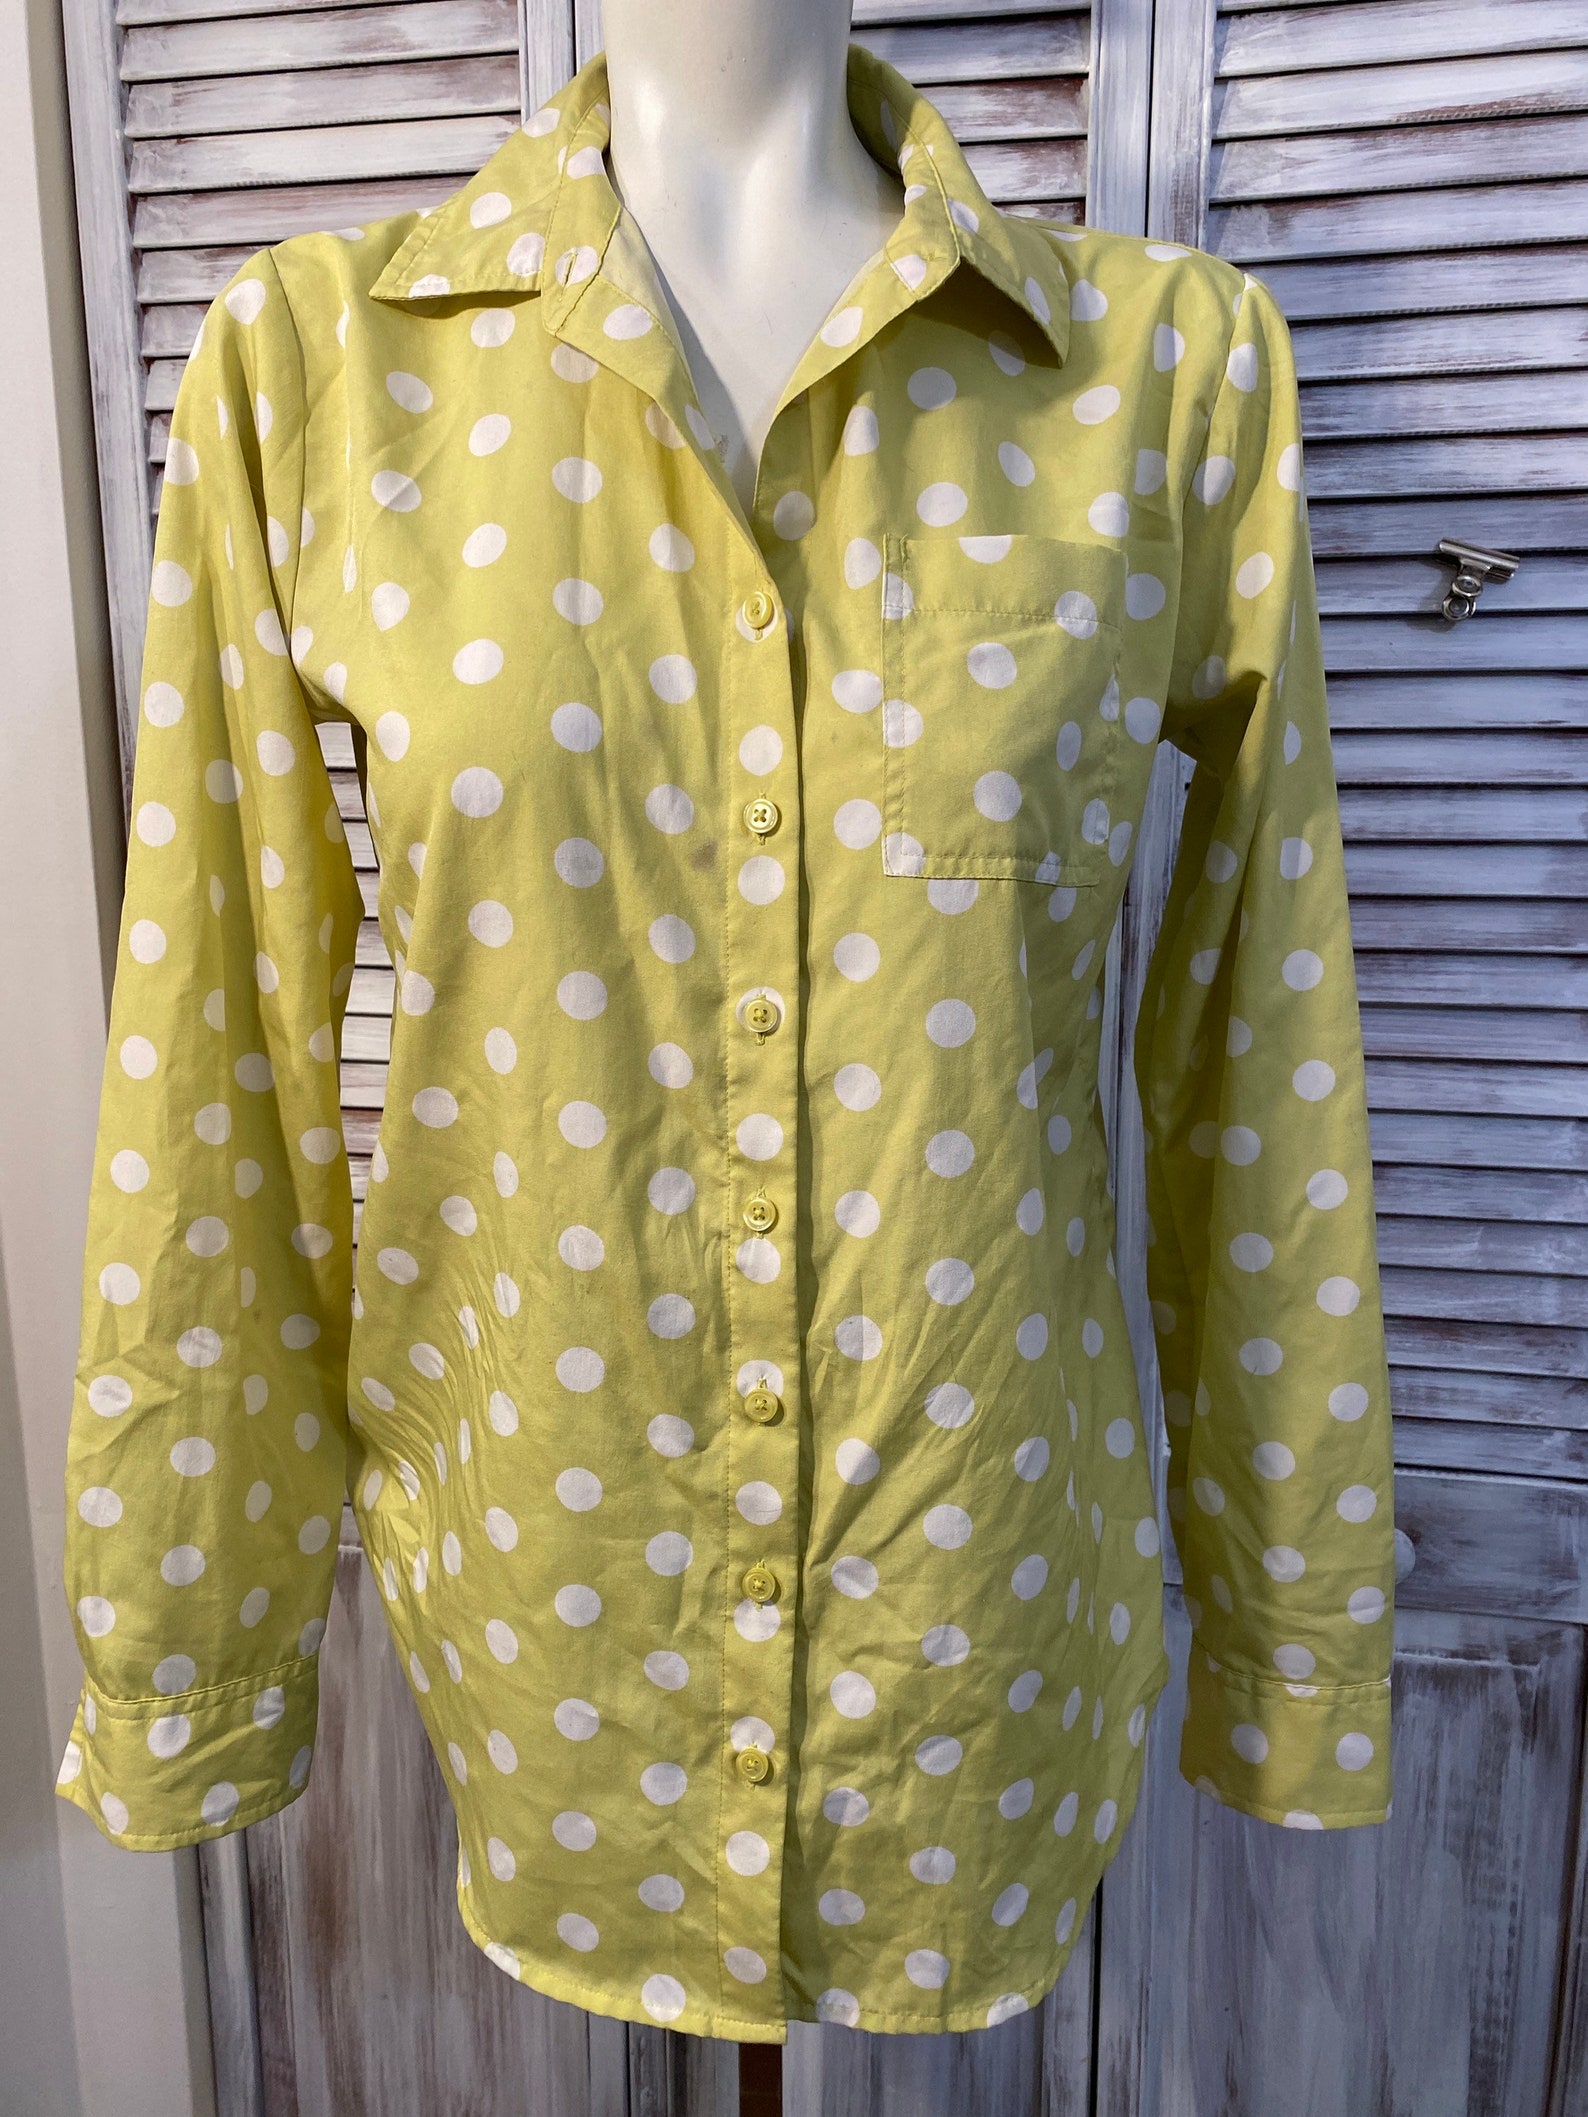 Pretty vintage women's blouse in lime green with white | Etsy